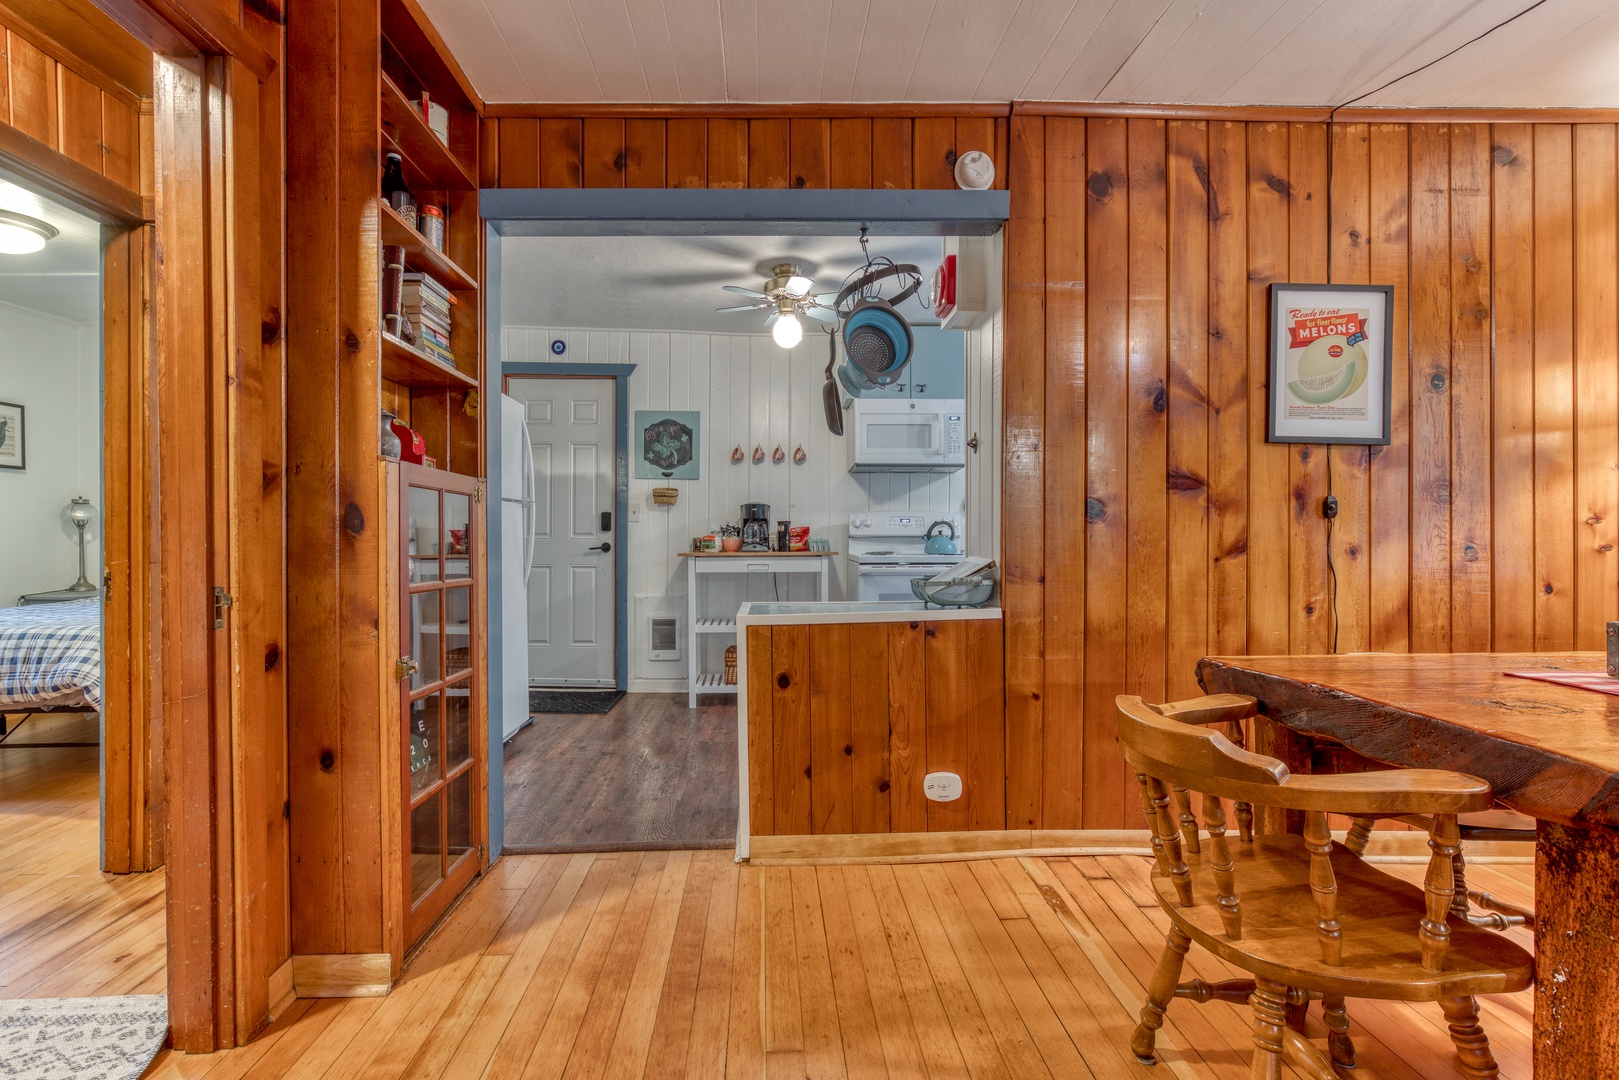 Brightwood Vacation Rentals, Springbrook Cabin - View of the kitchen from the living room/dining room